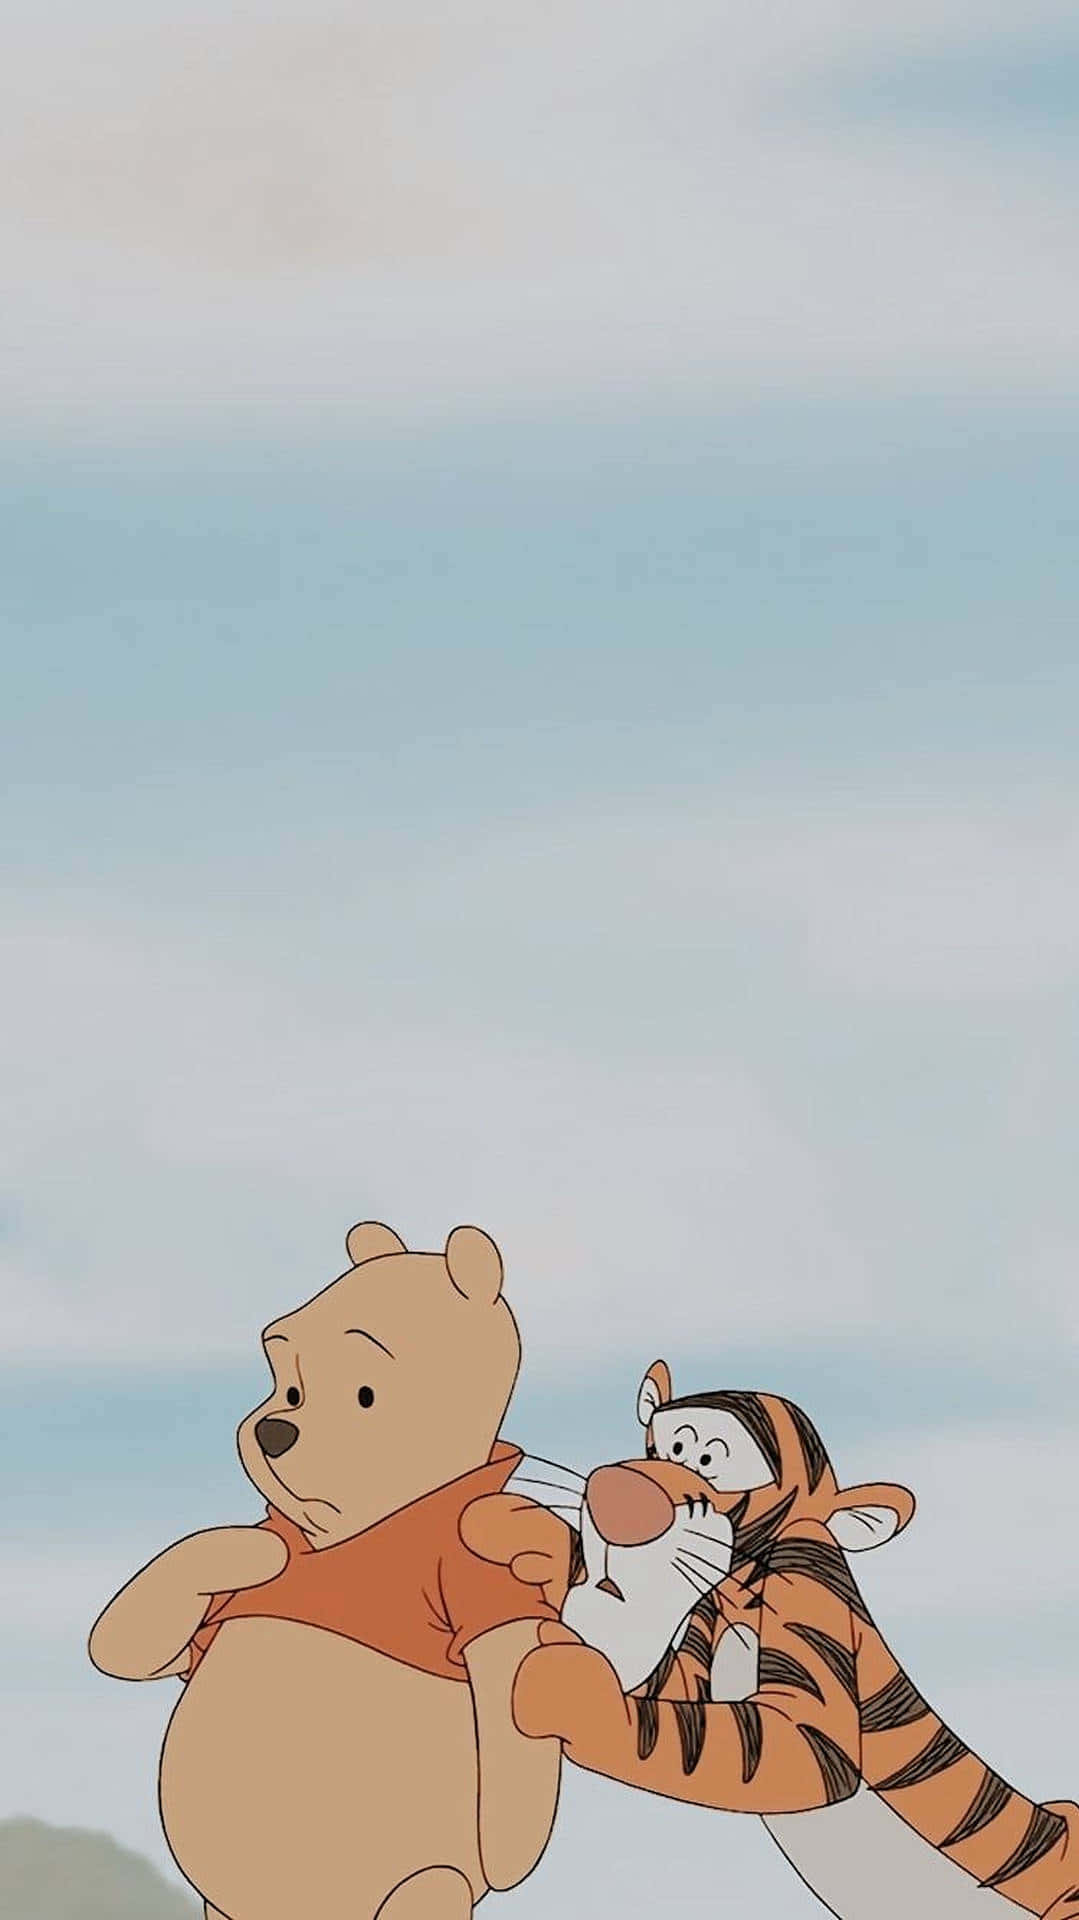 100+] Winnie The Pooh Aesthetic Pictures